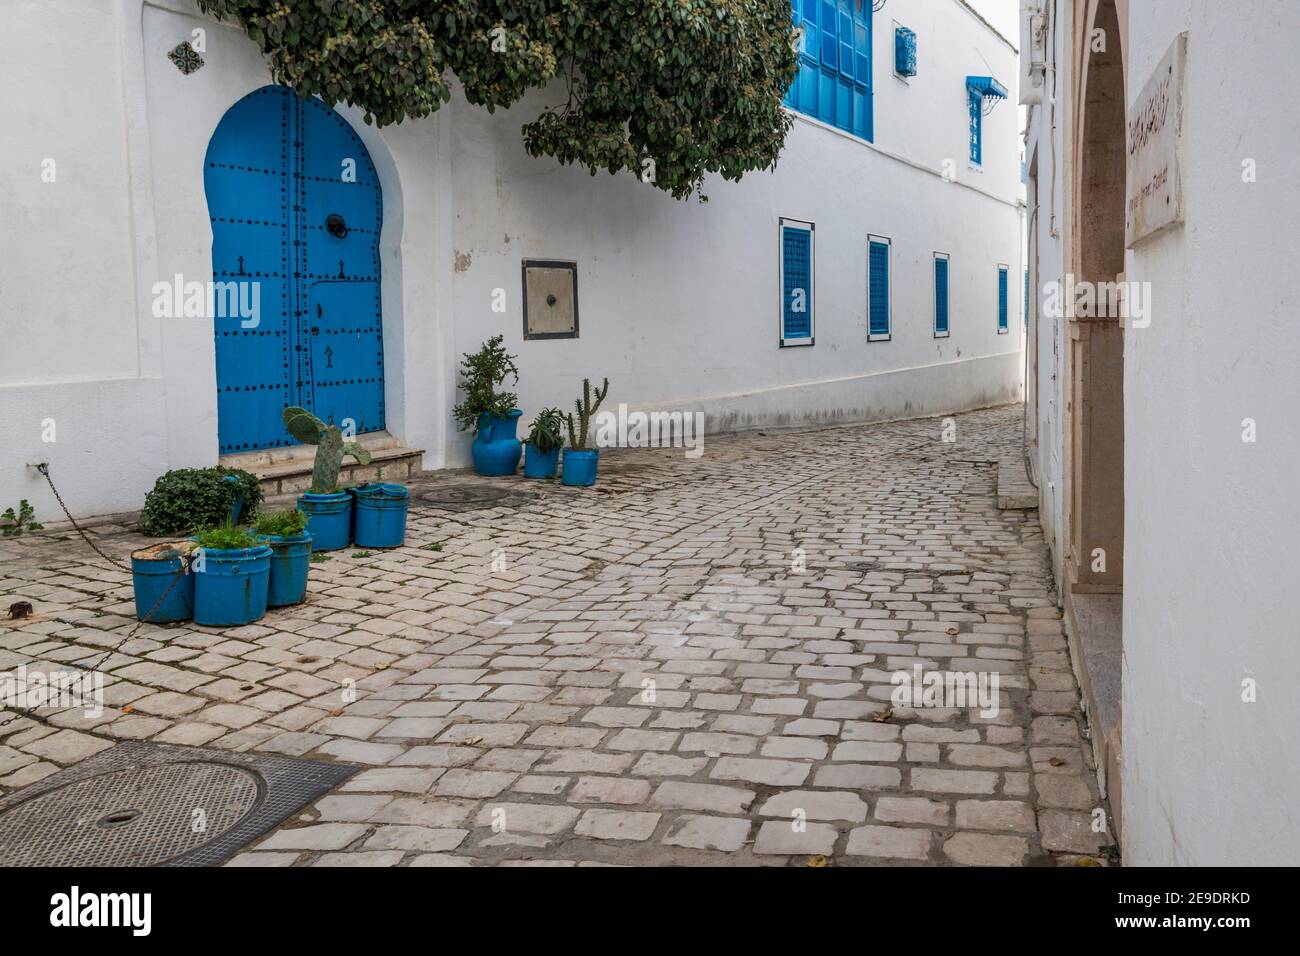 The cobbled streets of Sidi Bou Said. The blue and white tourist attraction overlooking the Mediterranean Sea. Tunisia, Africa. Stock Photo